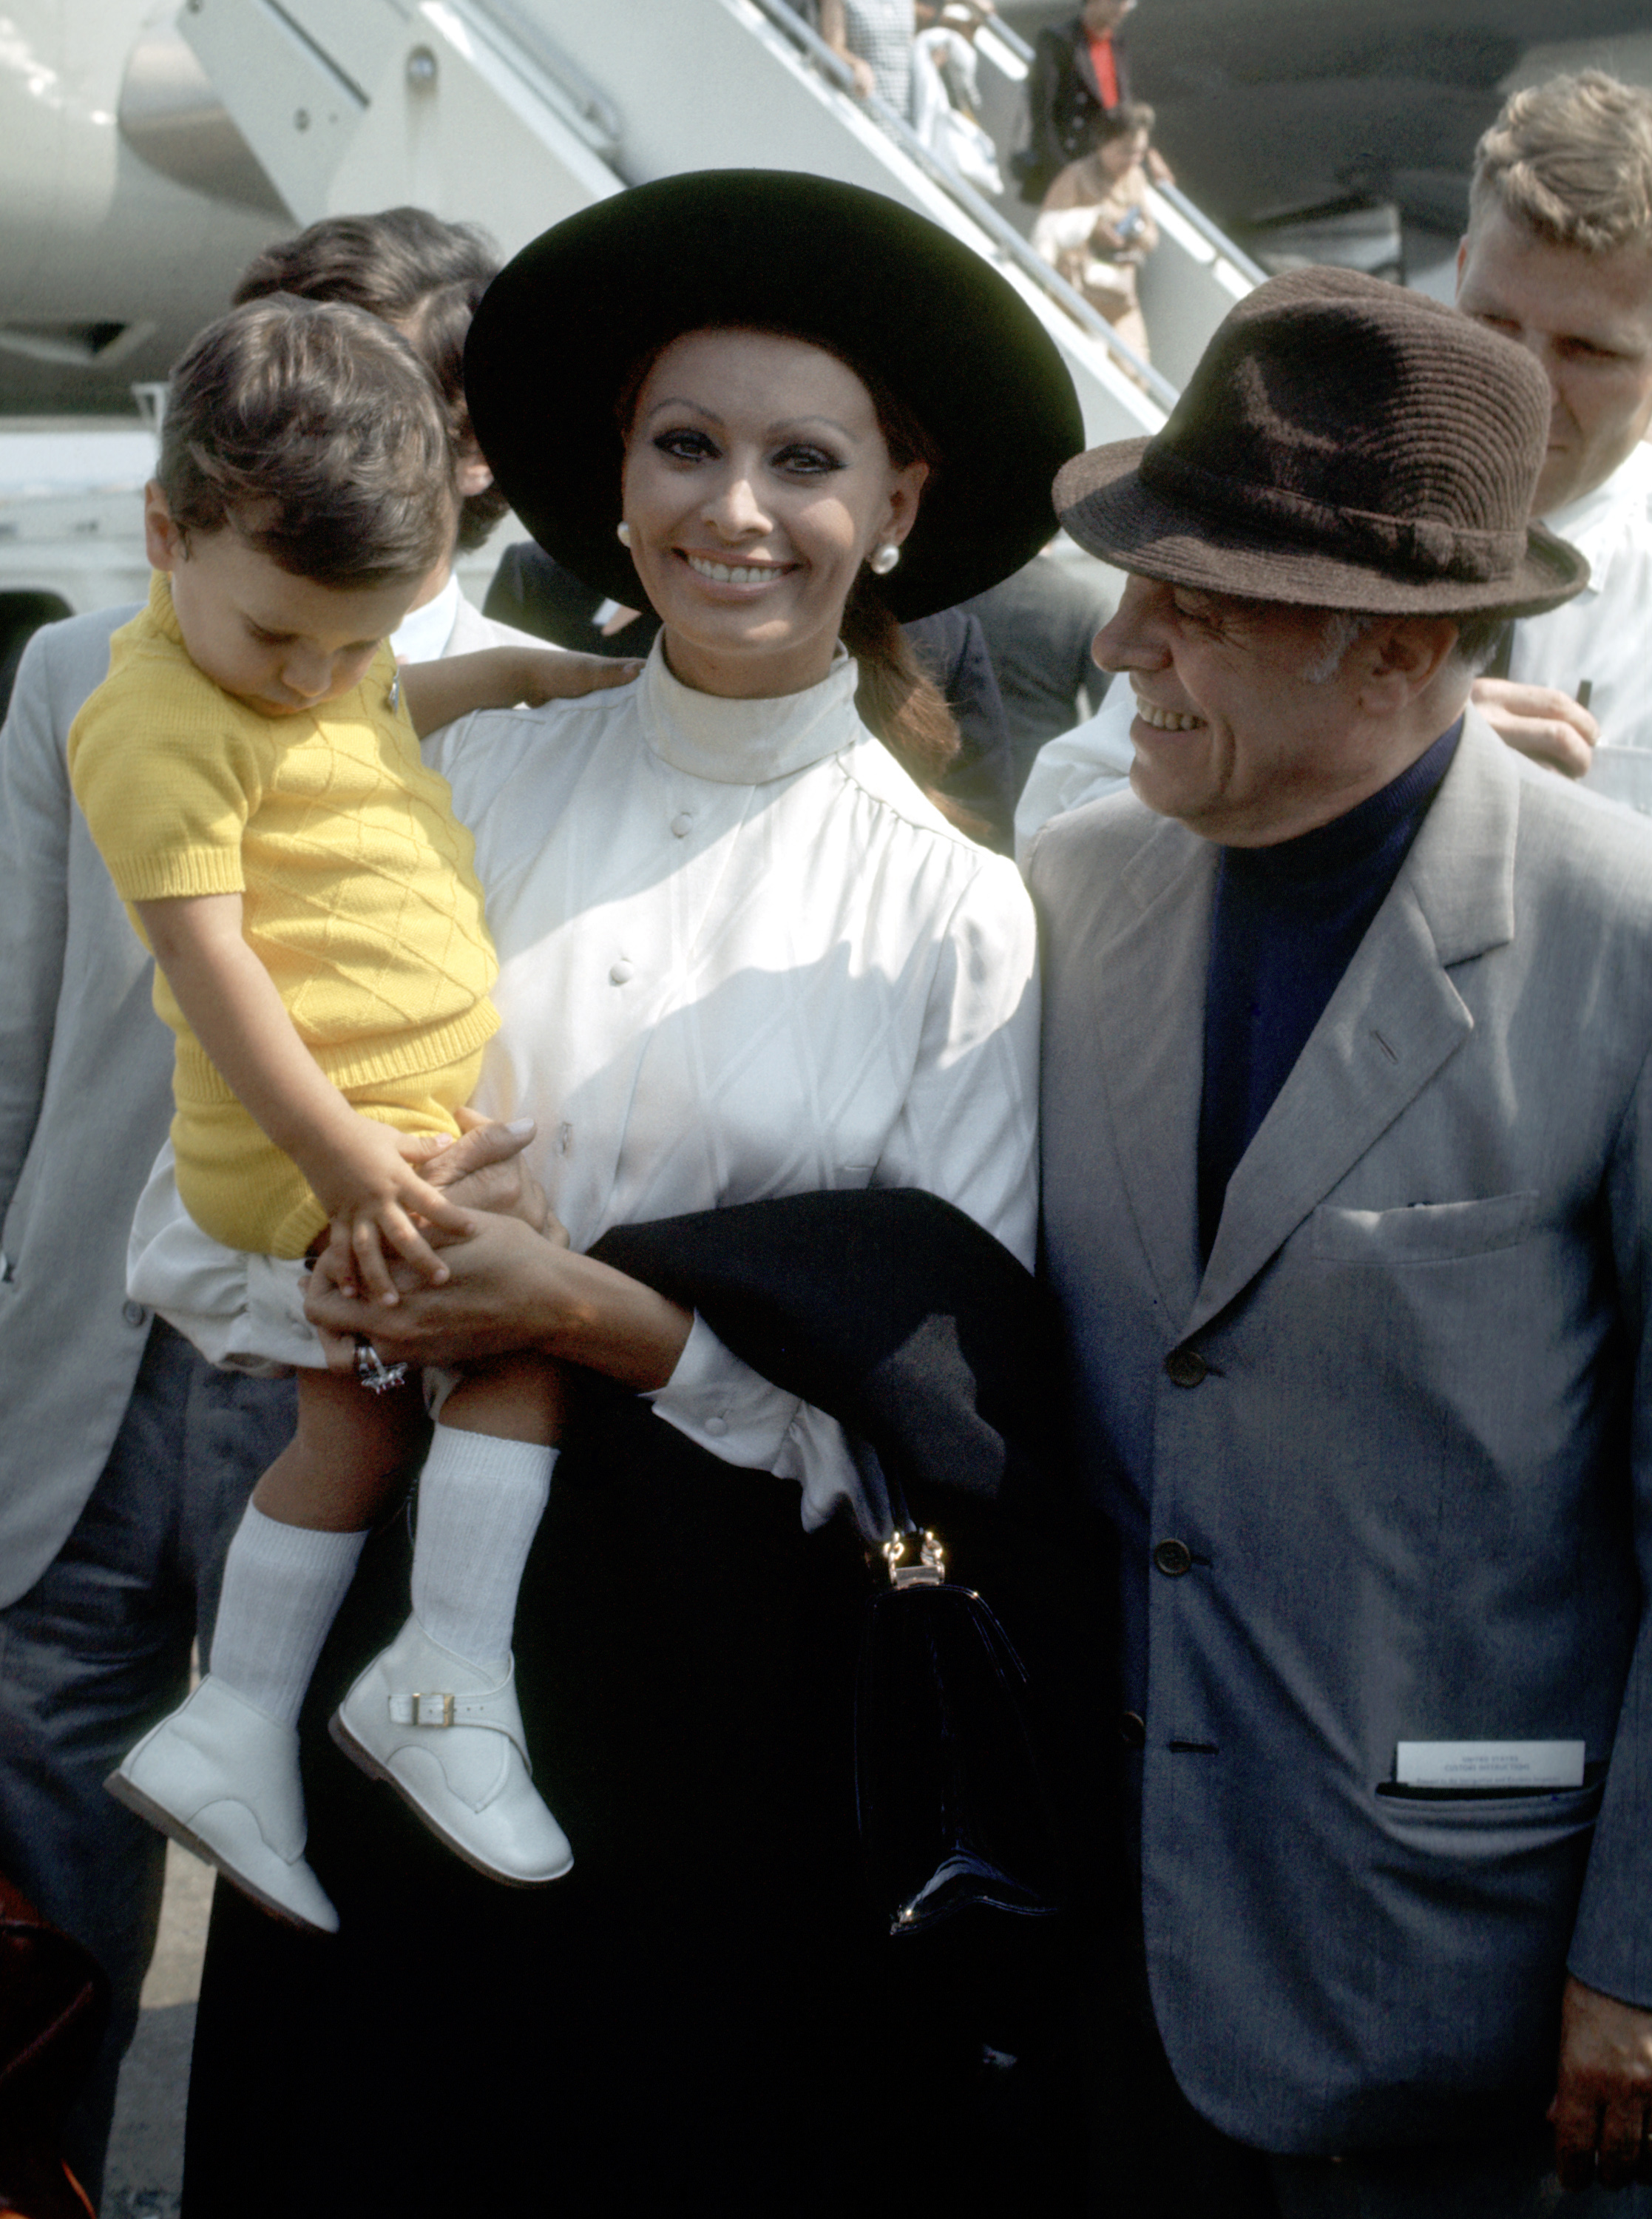 Sophia Loren, Carlo Ponti, and their Son Carlo Ponti Jr. photographed at the JFK International Airport on September 21, 1970 in New York City, New York | Source: Getty Images